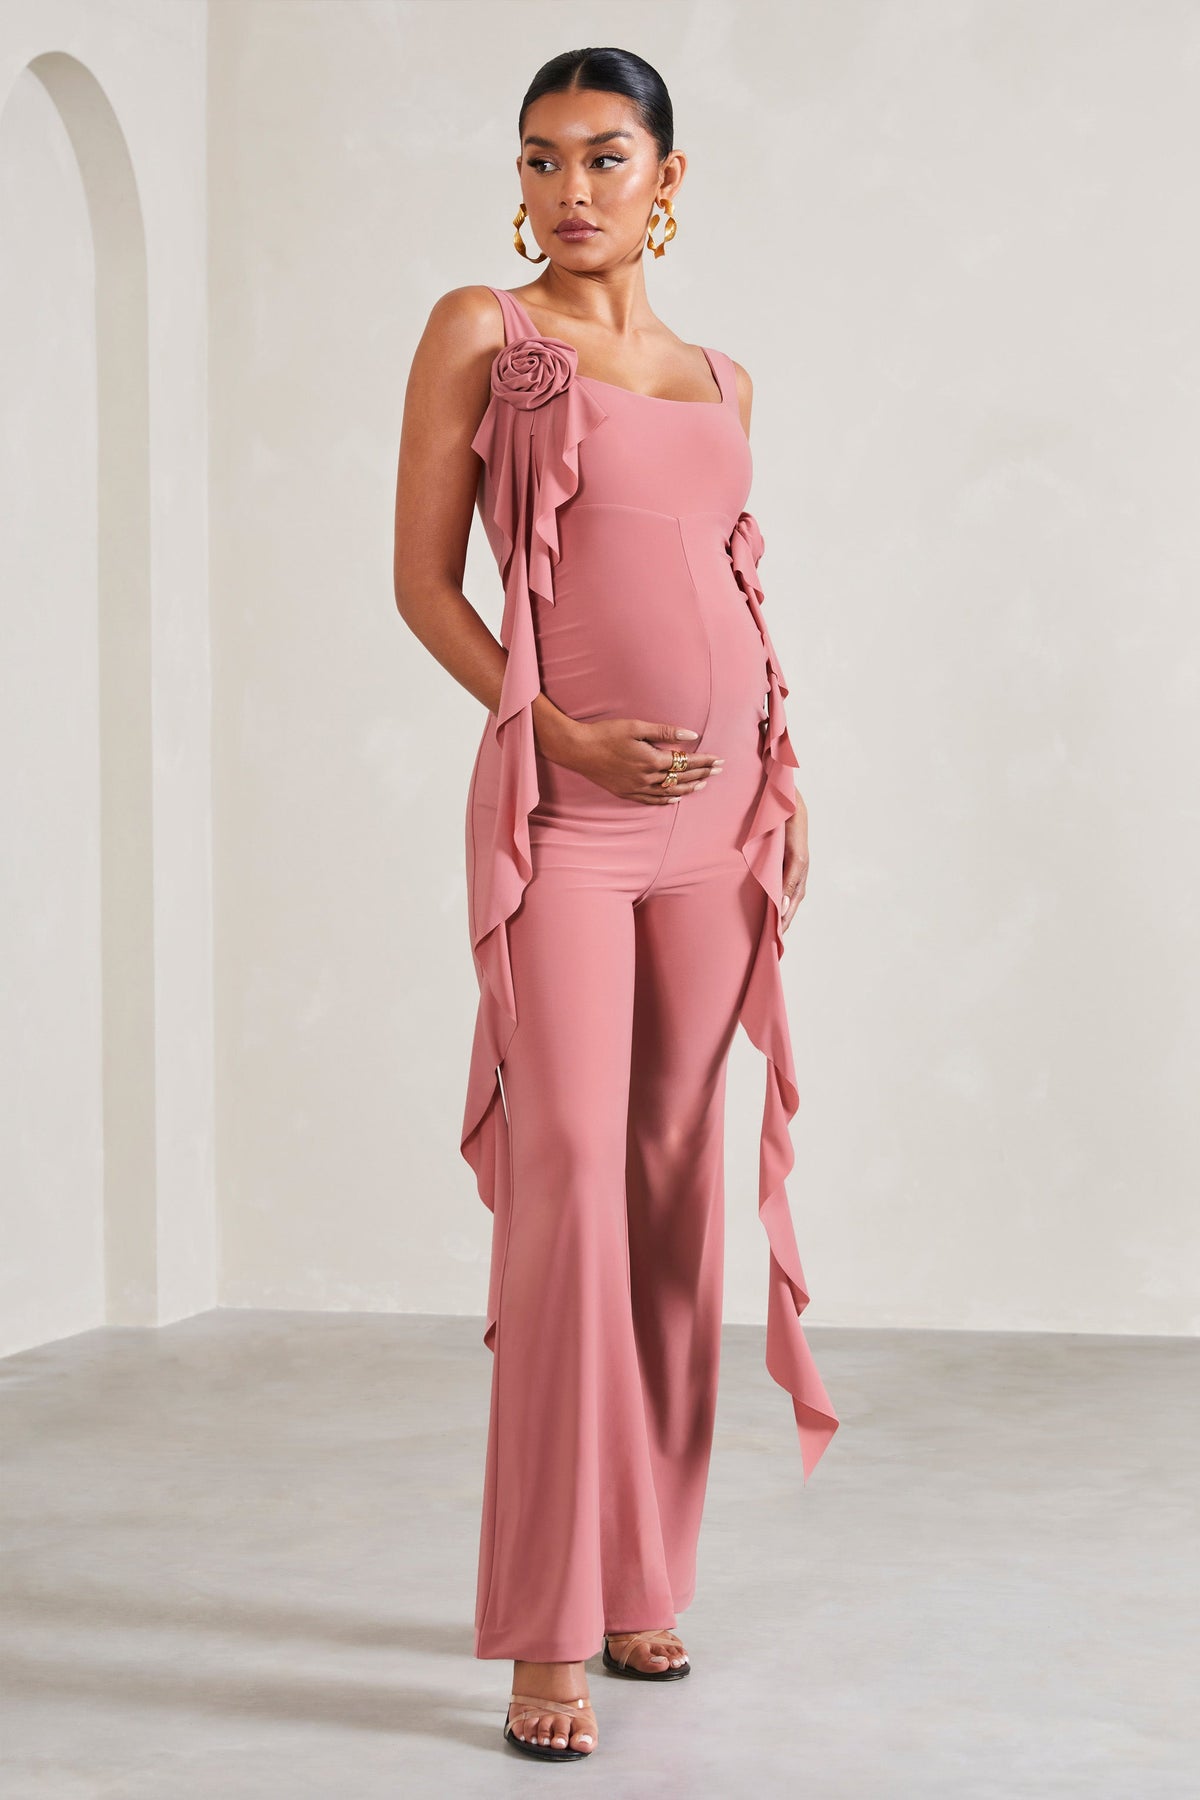 WB CL129580081 MagnoliaBlushPinkSquare NeckFlared legMaternityJumpsuitWithFlowers0 4